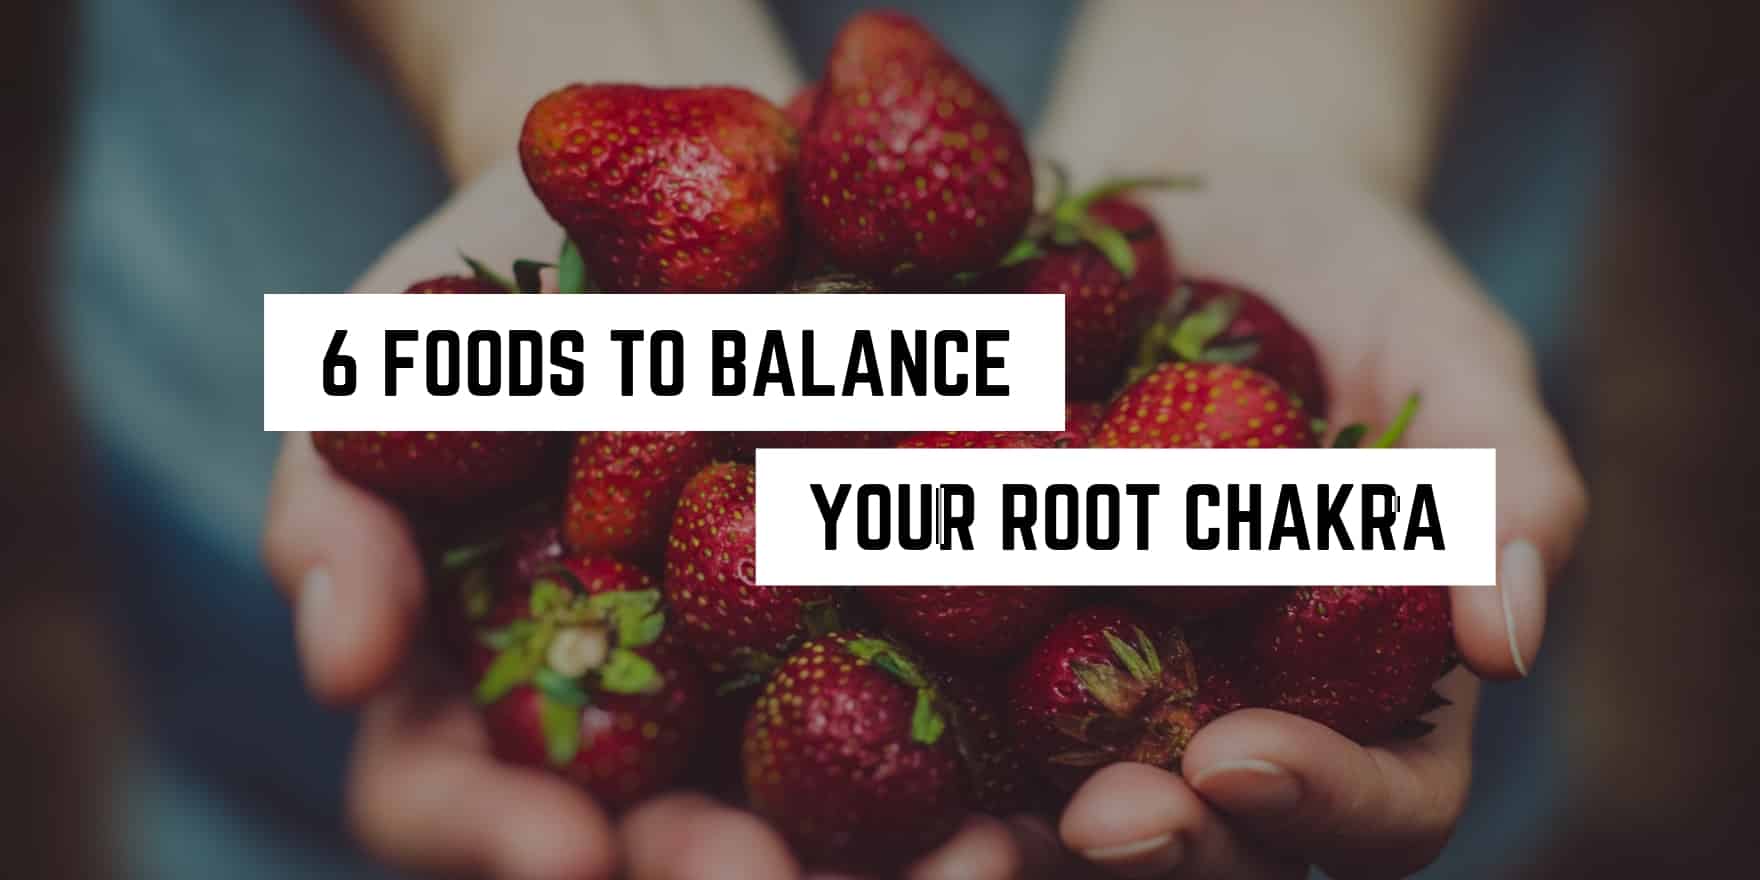 Cupped hands holding fresh strawberries with a caption suggesting they're one of six foods to balance your root chakra, perfect for your spiritual regimen.